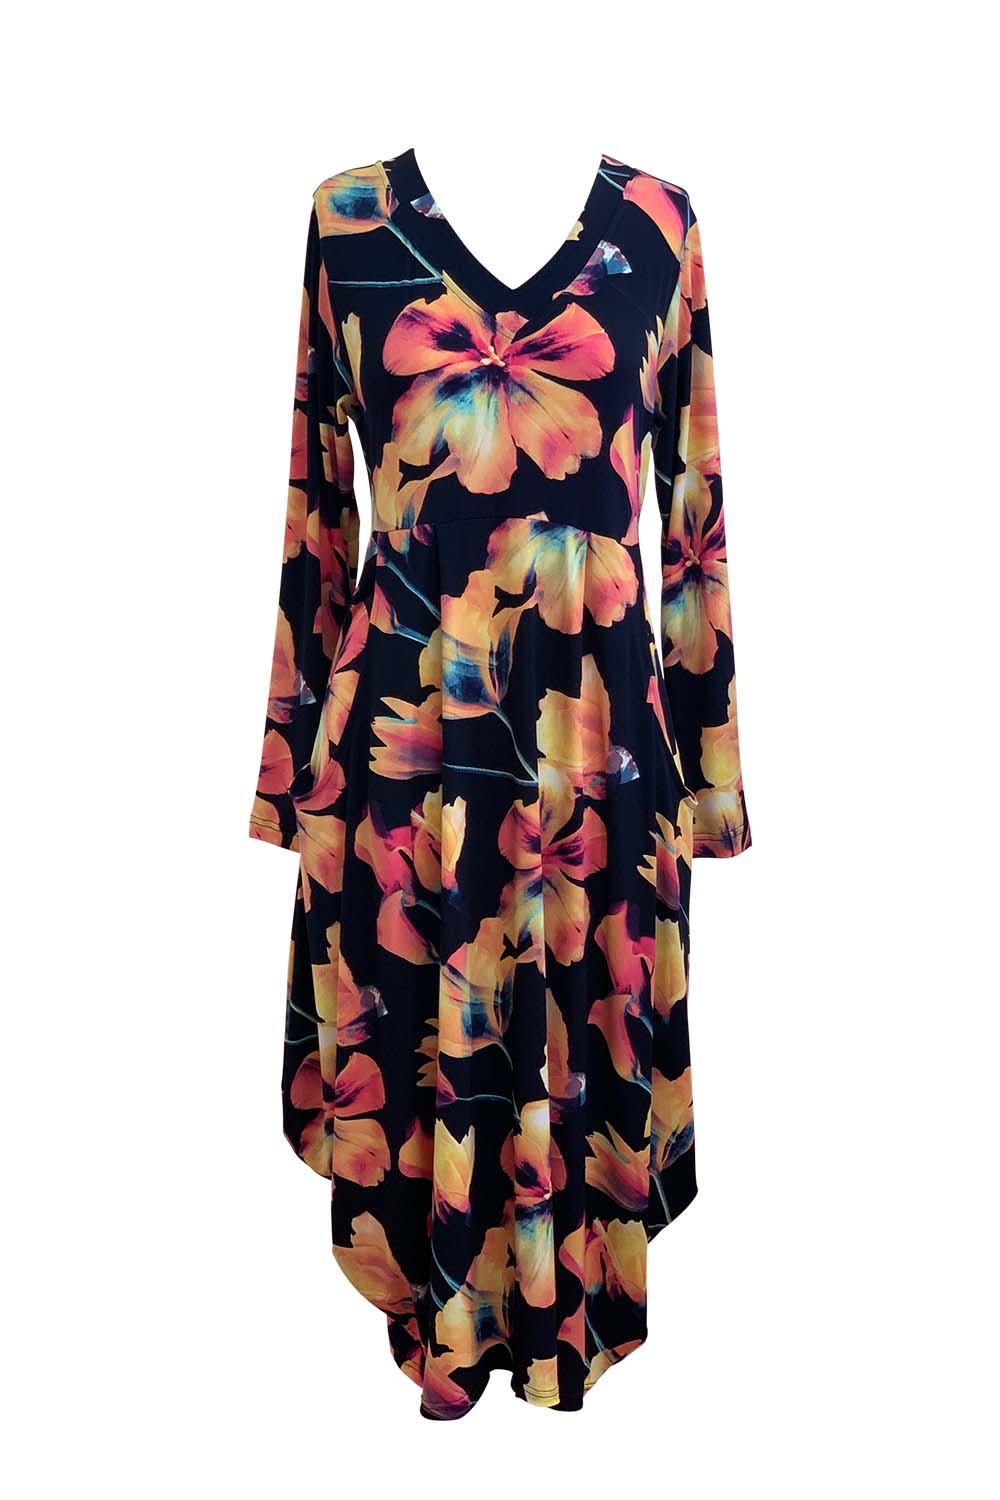 Bittermoon Carly Dress - Tropical